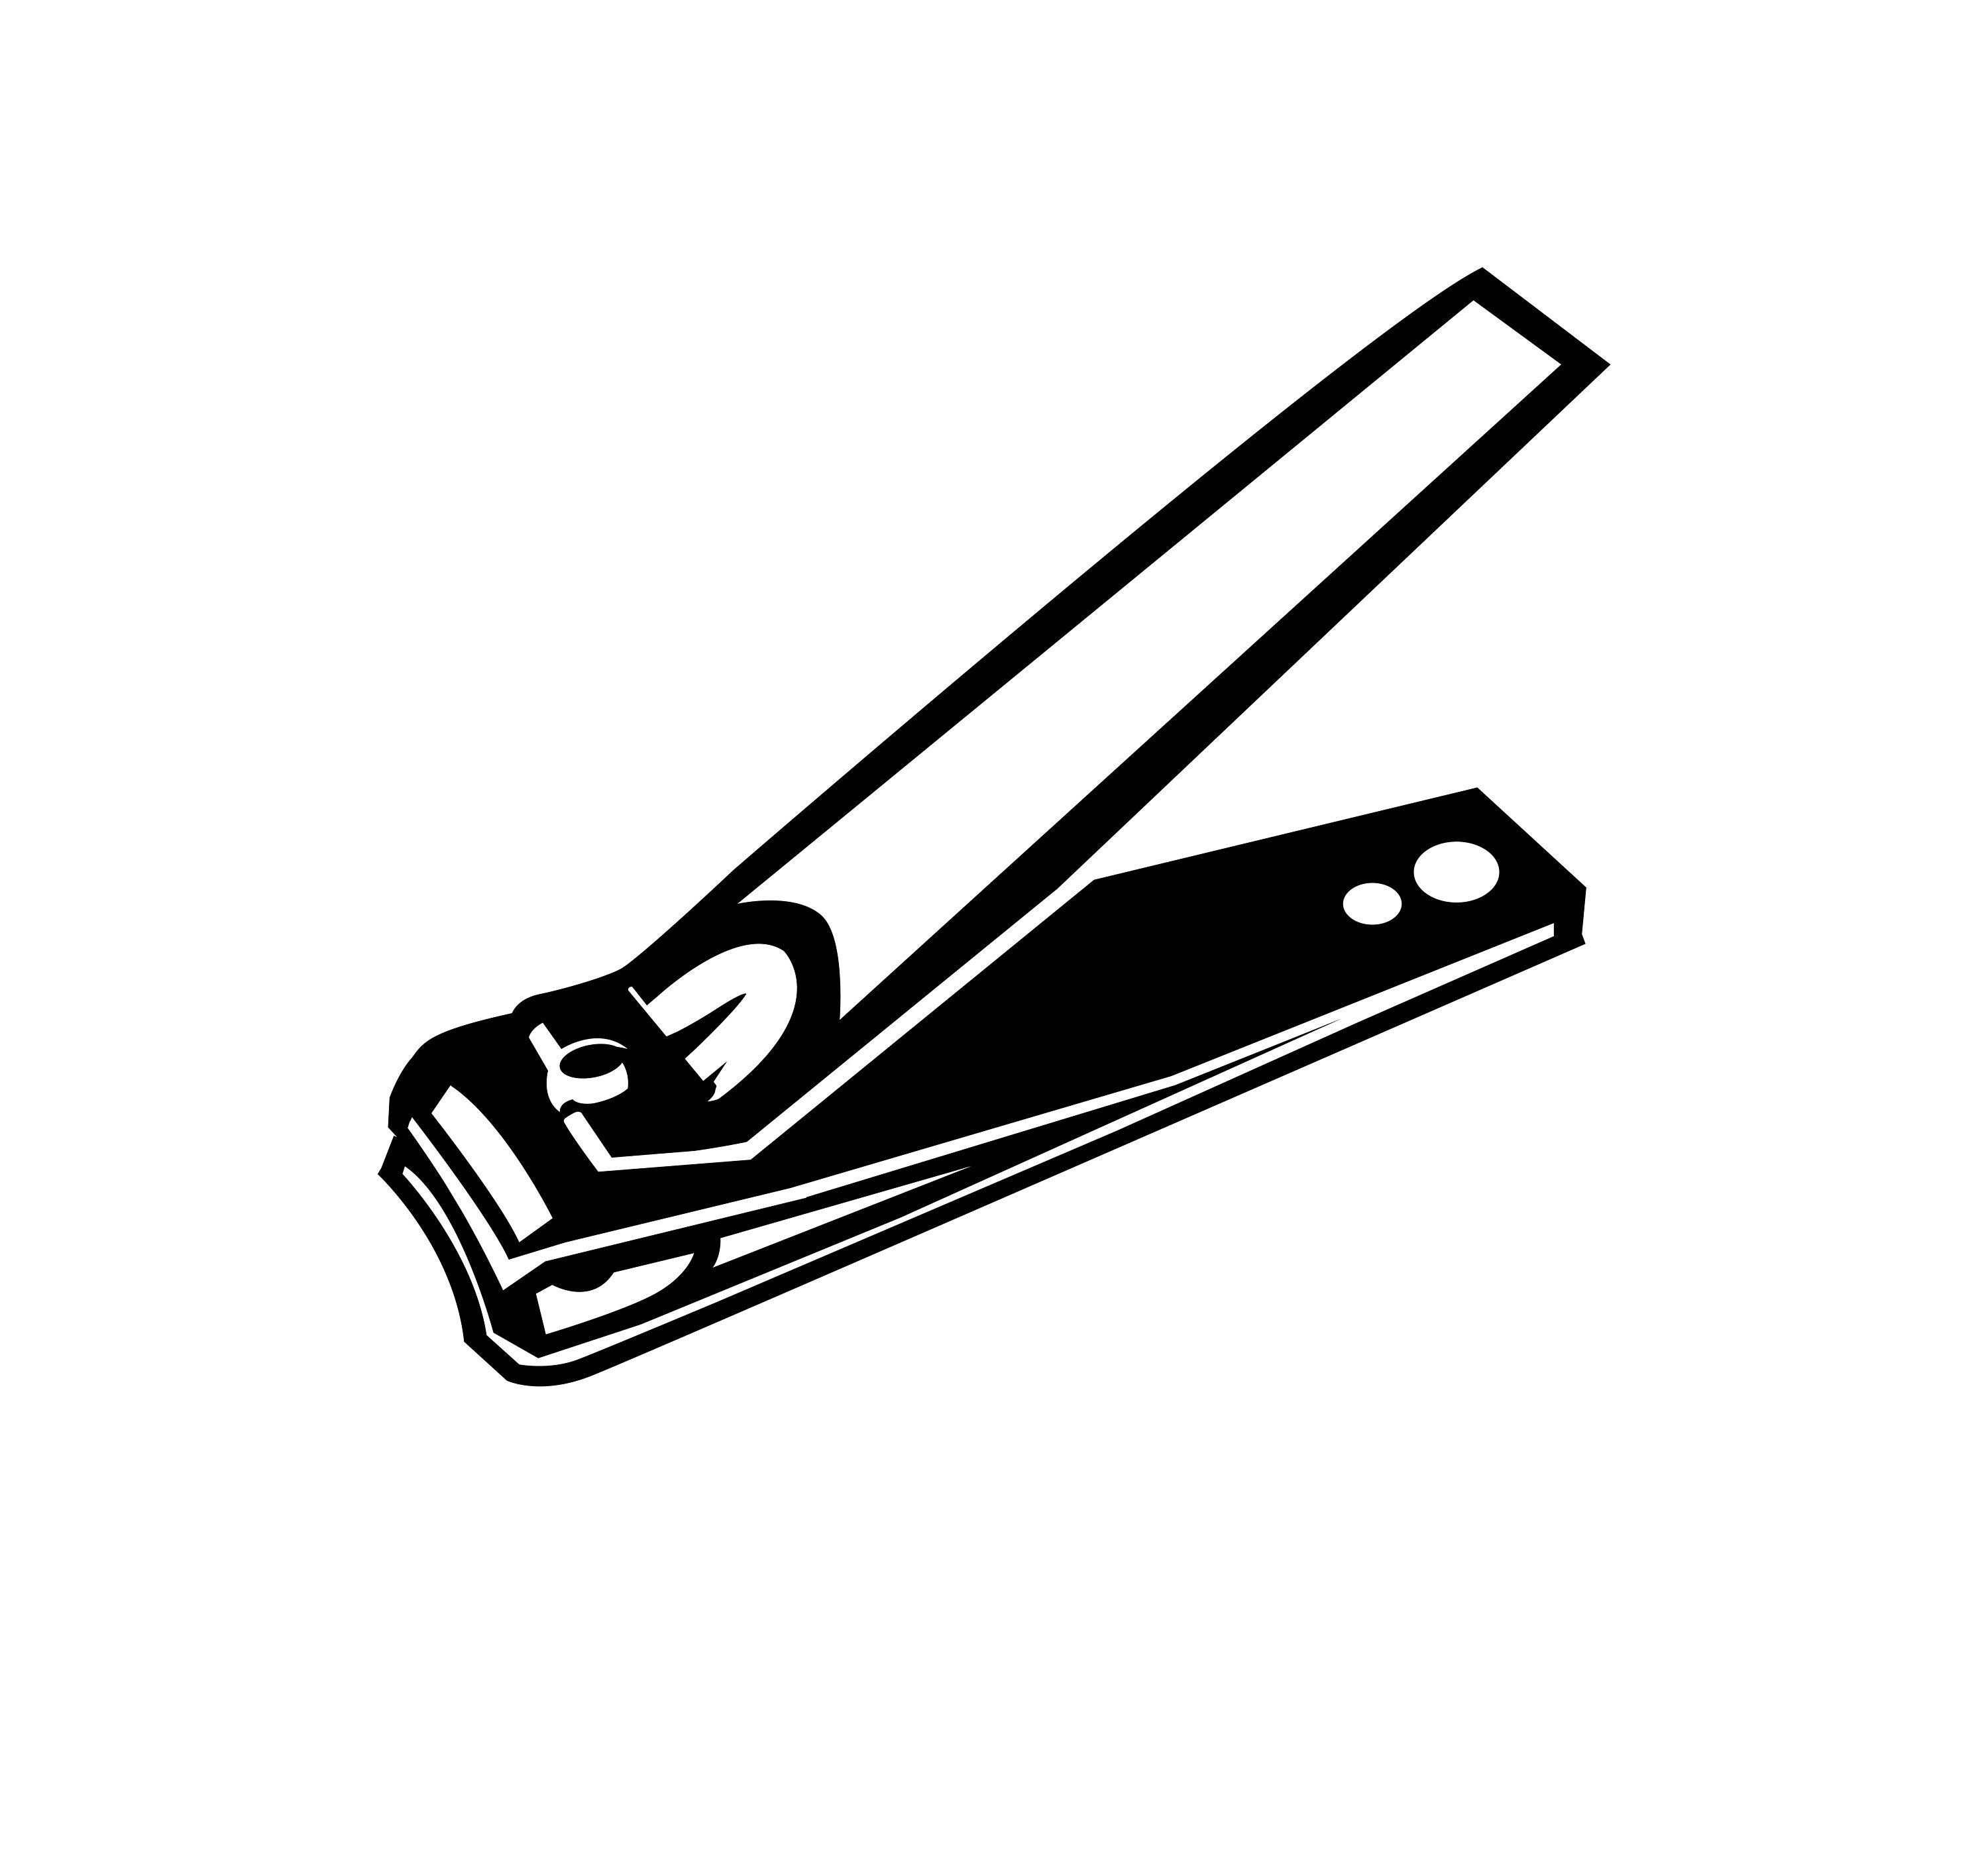 Nail, pin - cartoon vector and illustration, black and white, hand drawn,  sketch style, isolated on white background.:: tasmeemME.com